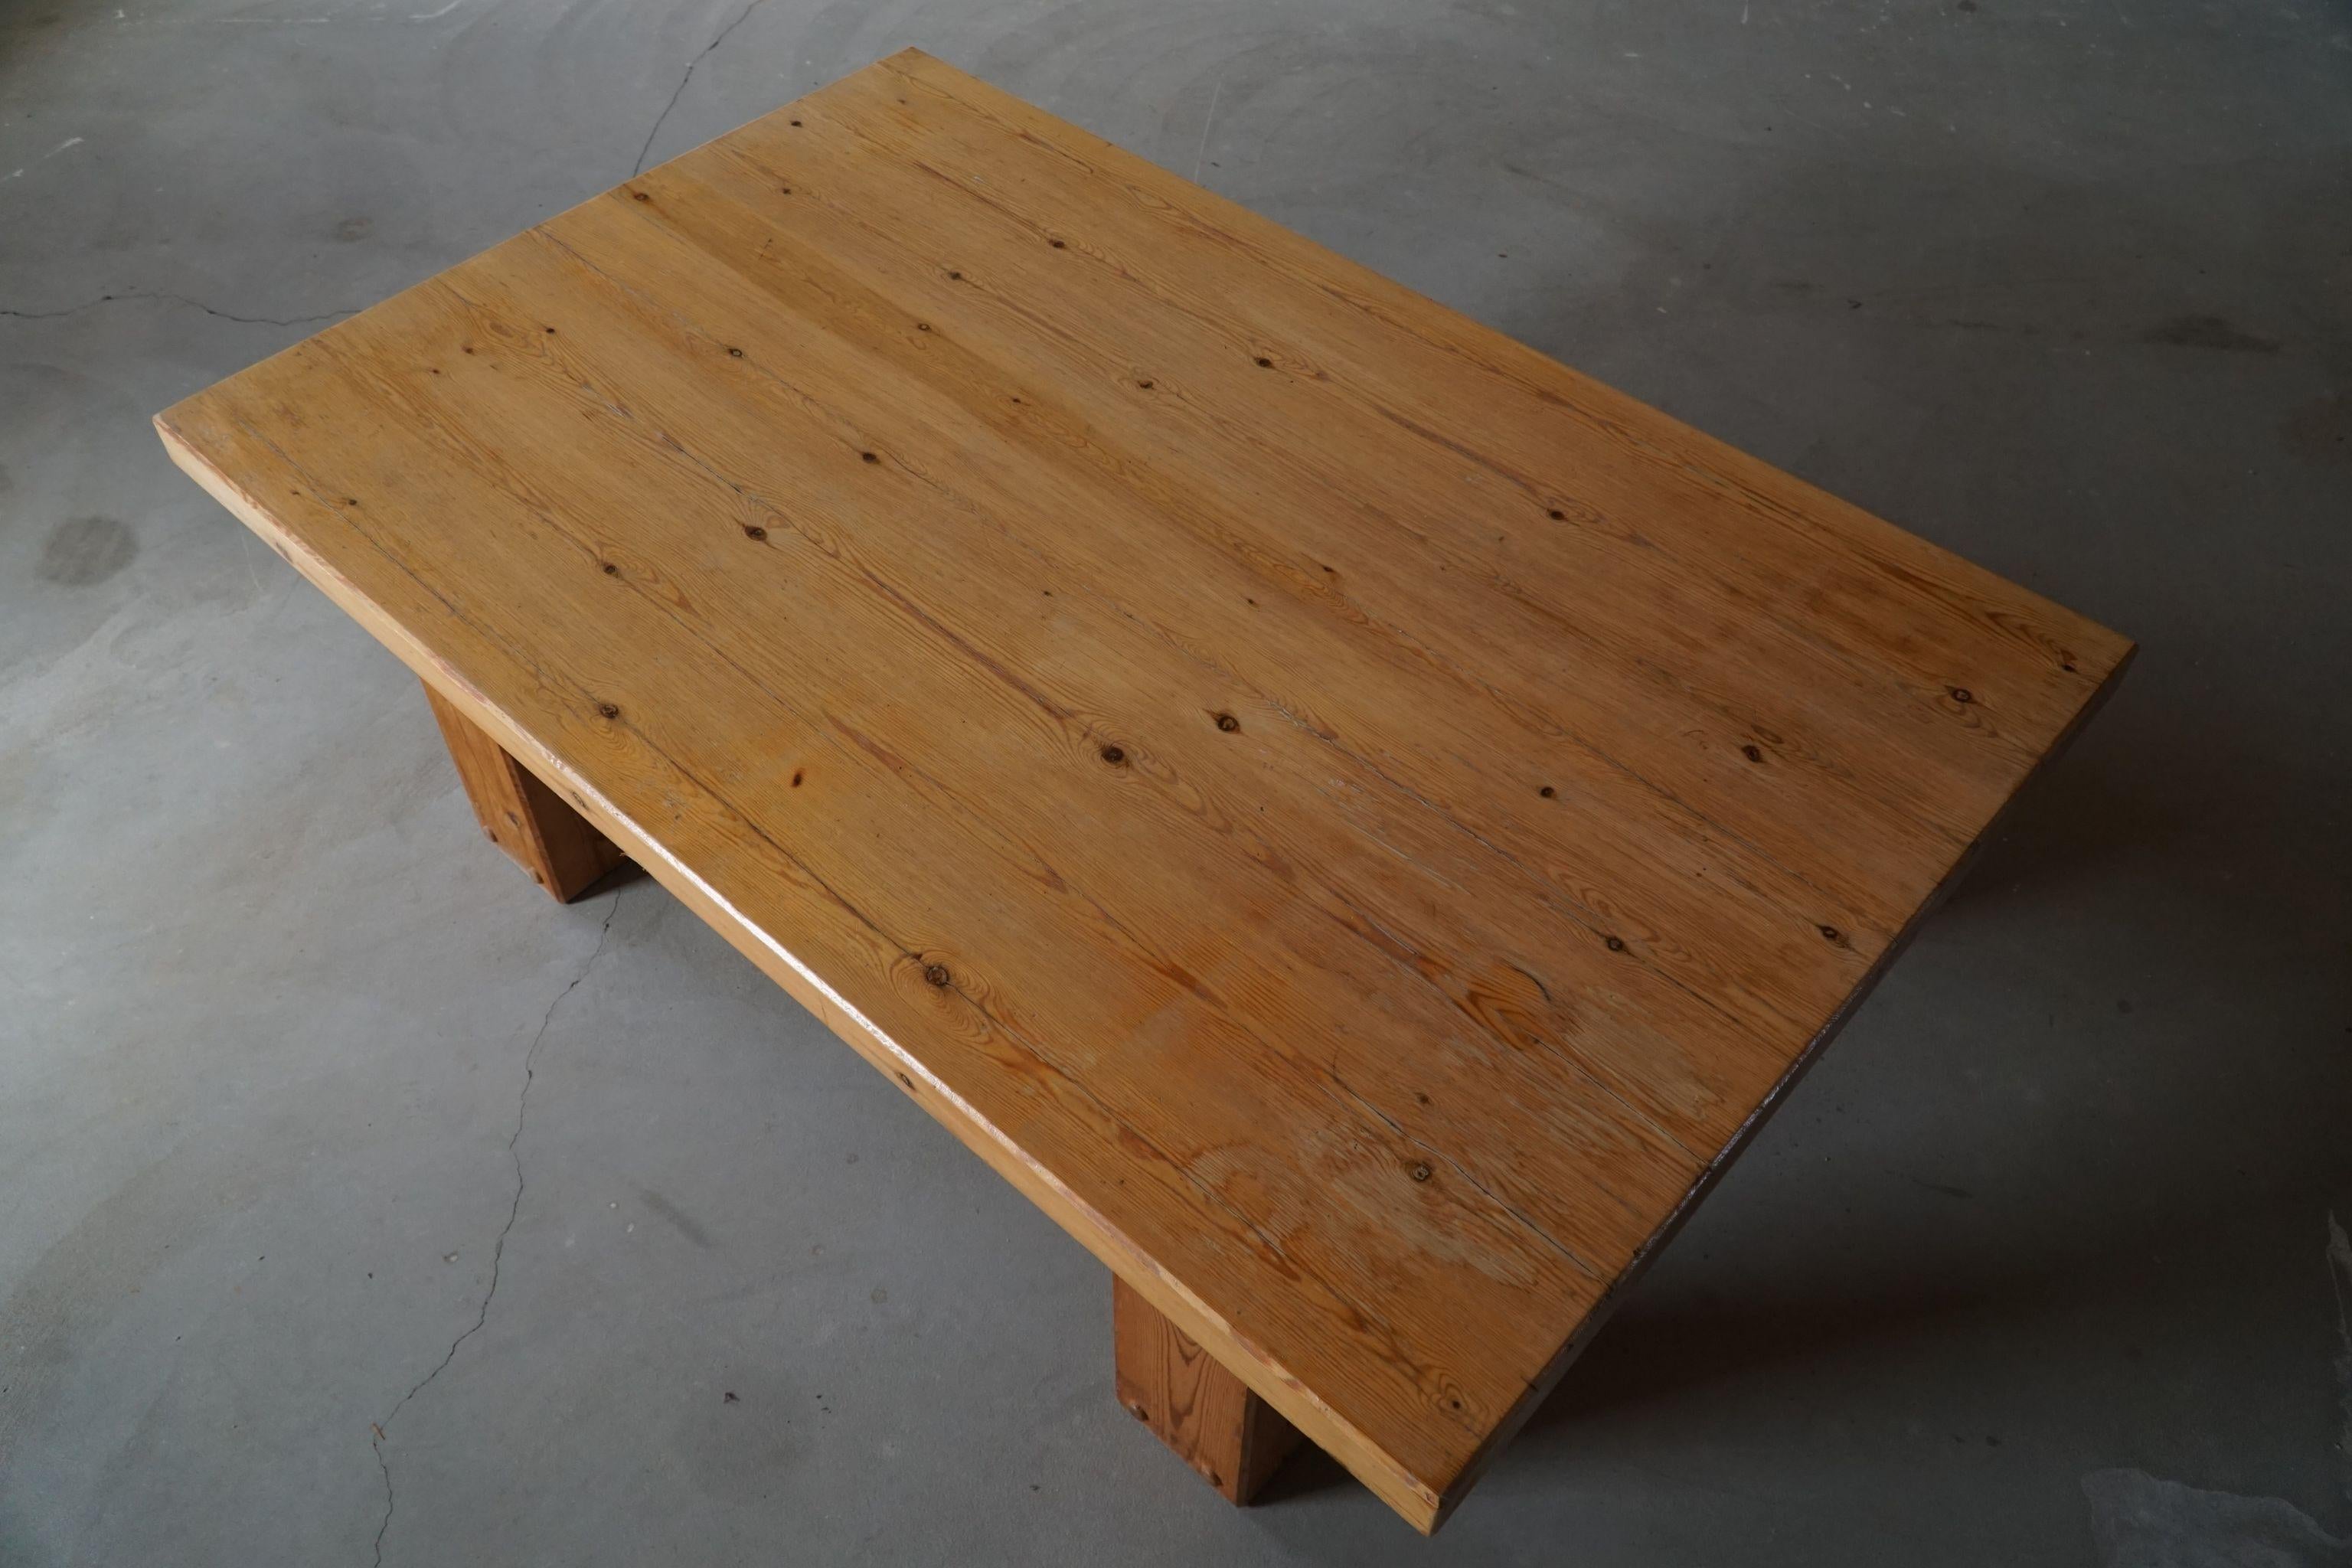 Hand-Crafted Mid Century Large Solid Rectangular Coffee Table in Pine, Danish Modern, 1960s For Sale